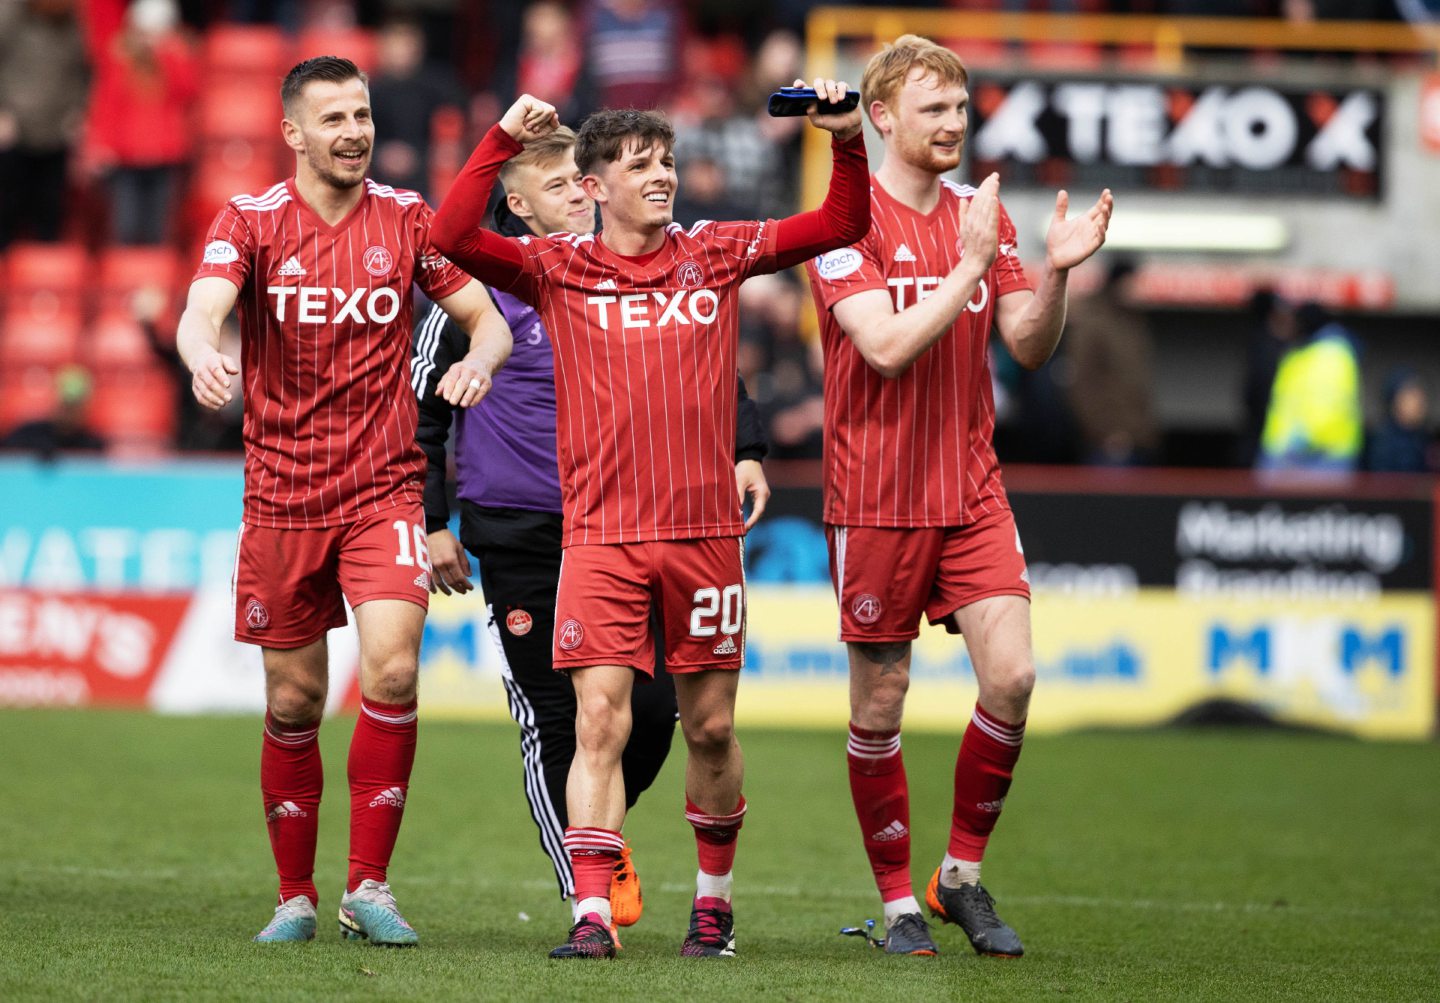 Leighton Clarkson and other Dons players celebrating after a game